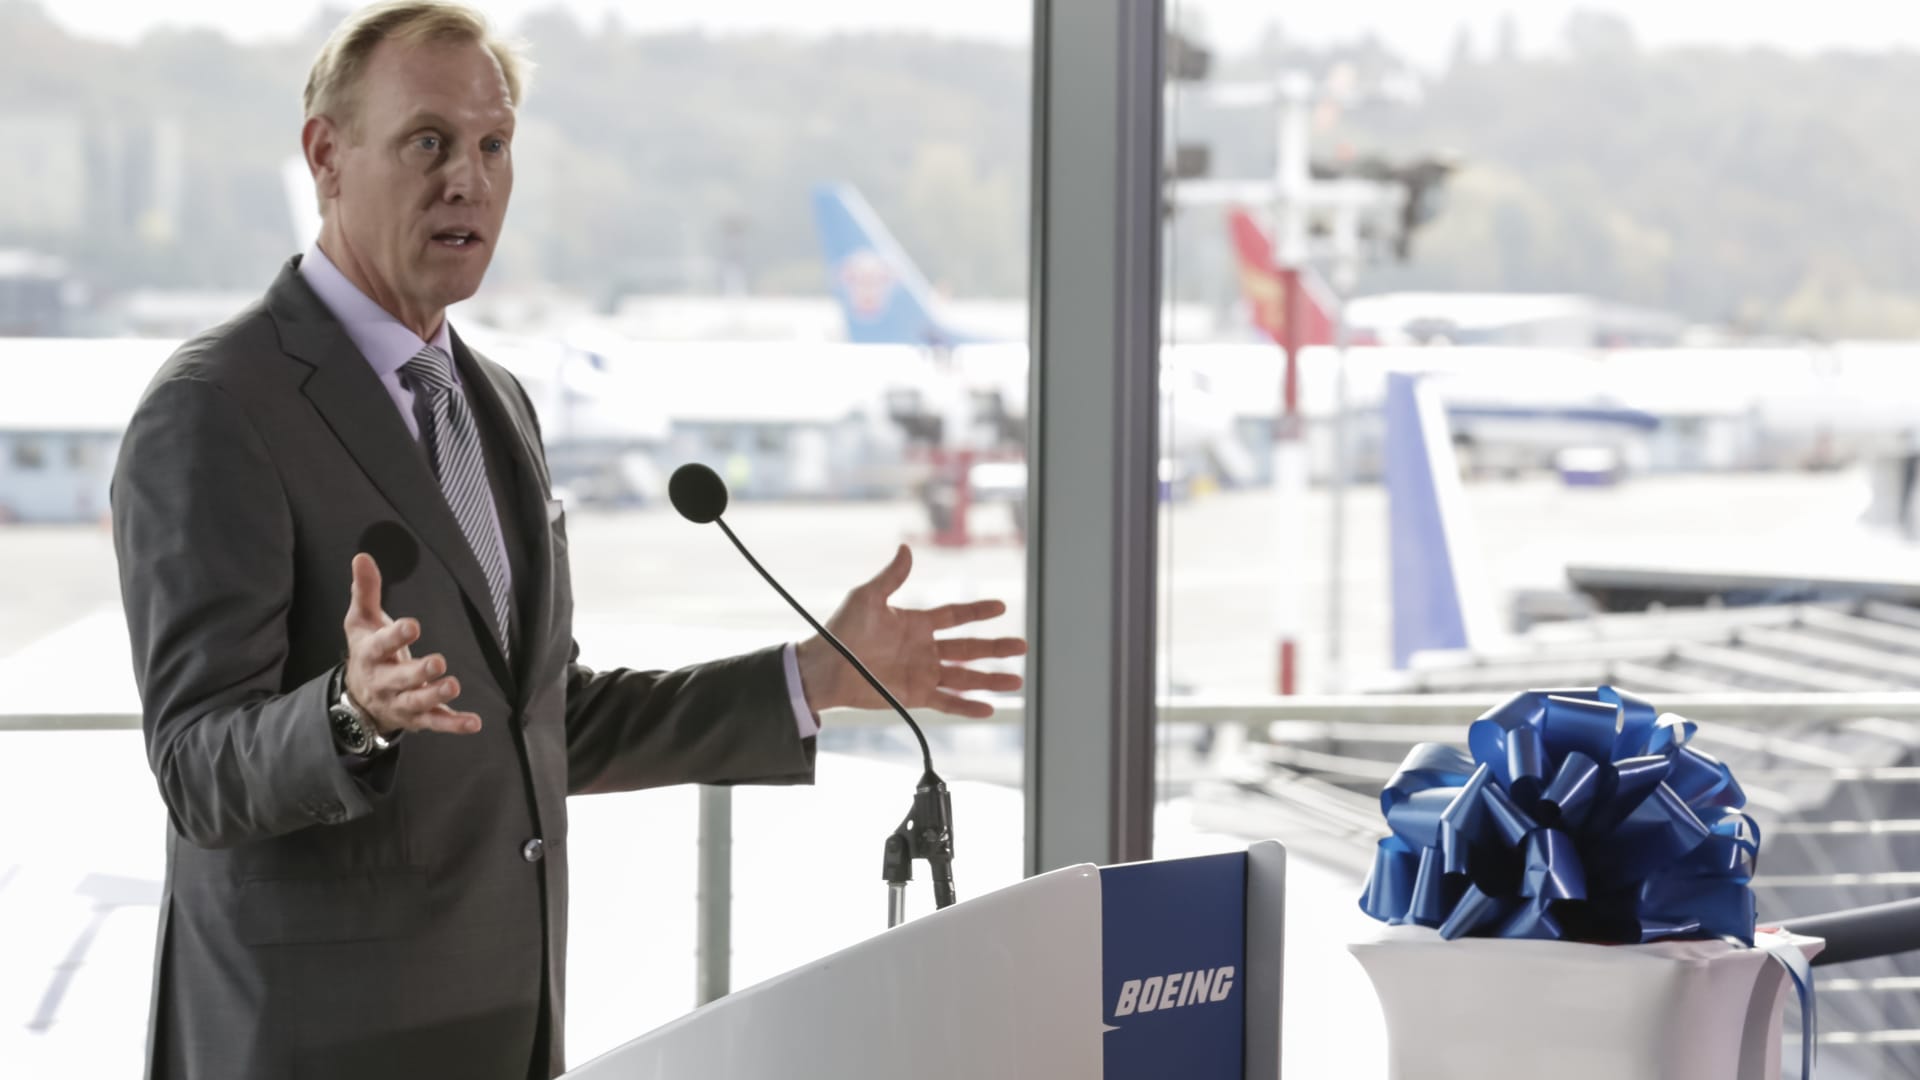 Pat Shanahan, then-senior vice president of Airplane Programs for Boeing Commercial Airplanes, speaks during the grand opening of the new Boeing 737 Delivery Center on October 19, 2015 in Seattle, Washington.